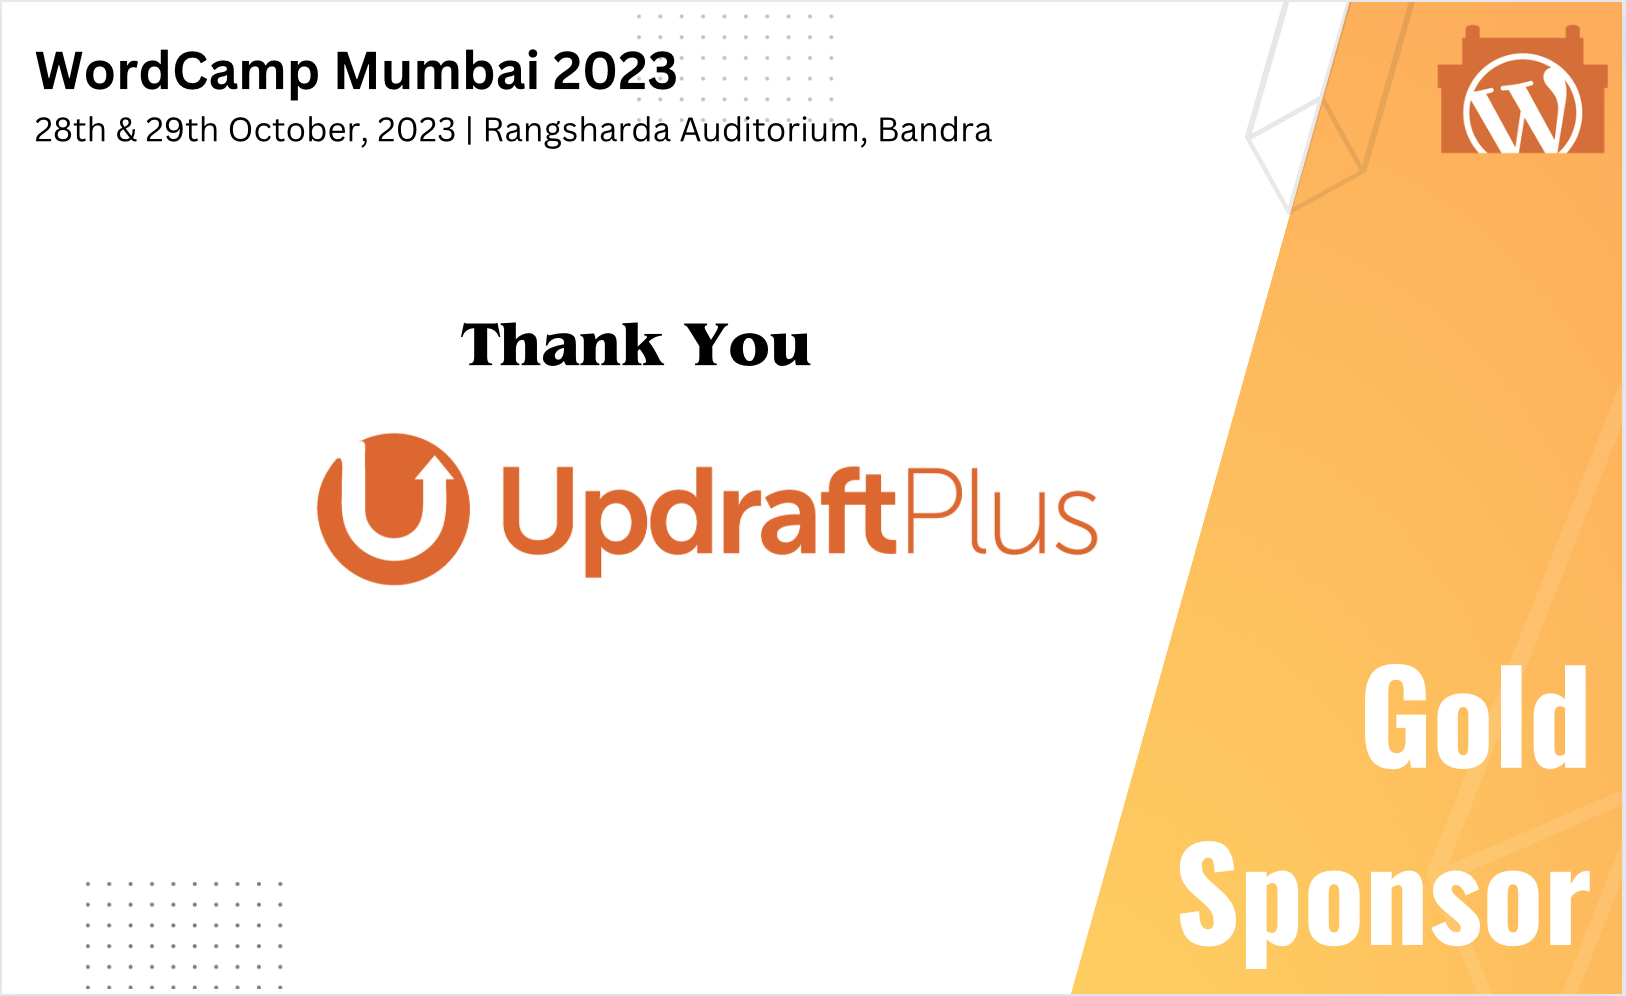 Thank You UpdraftPlus, for being our Gold Sponsor